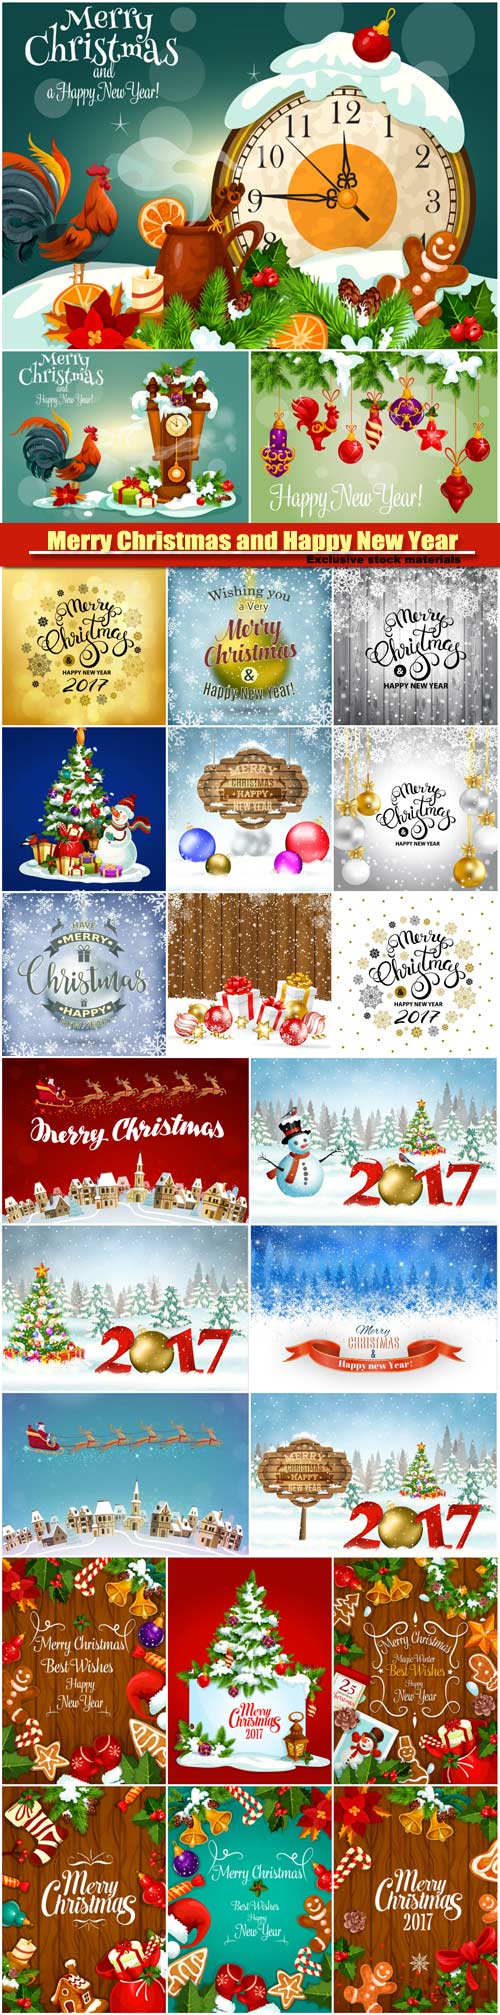 Merry Christmas and Happy New Year vector background, santa riding reindeer ...